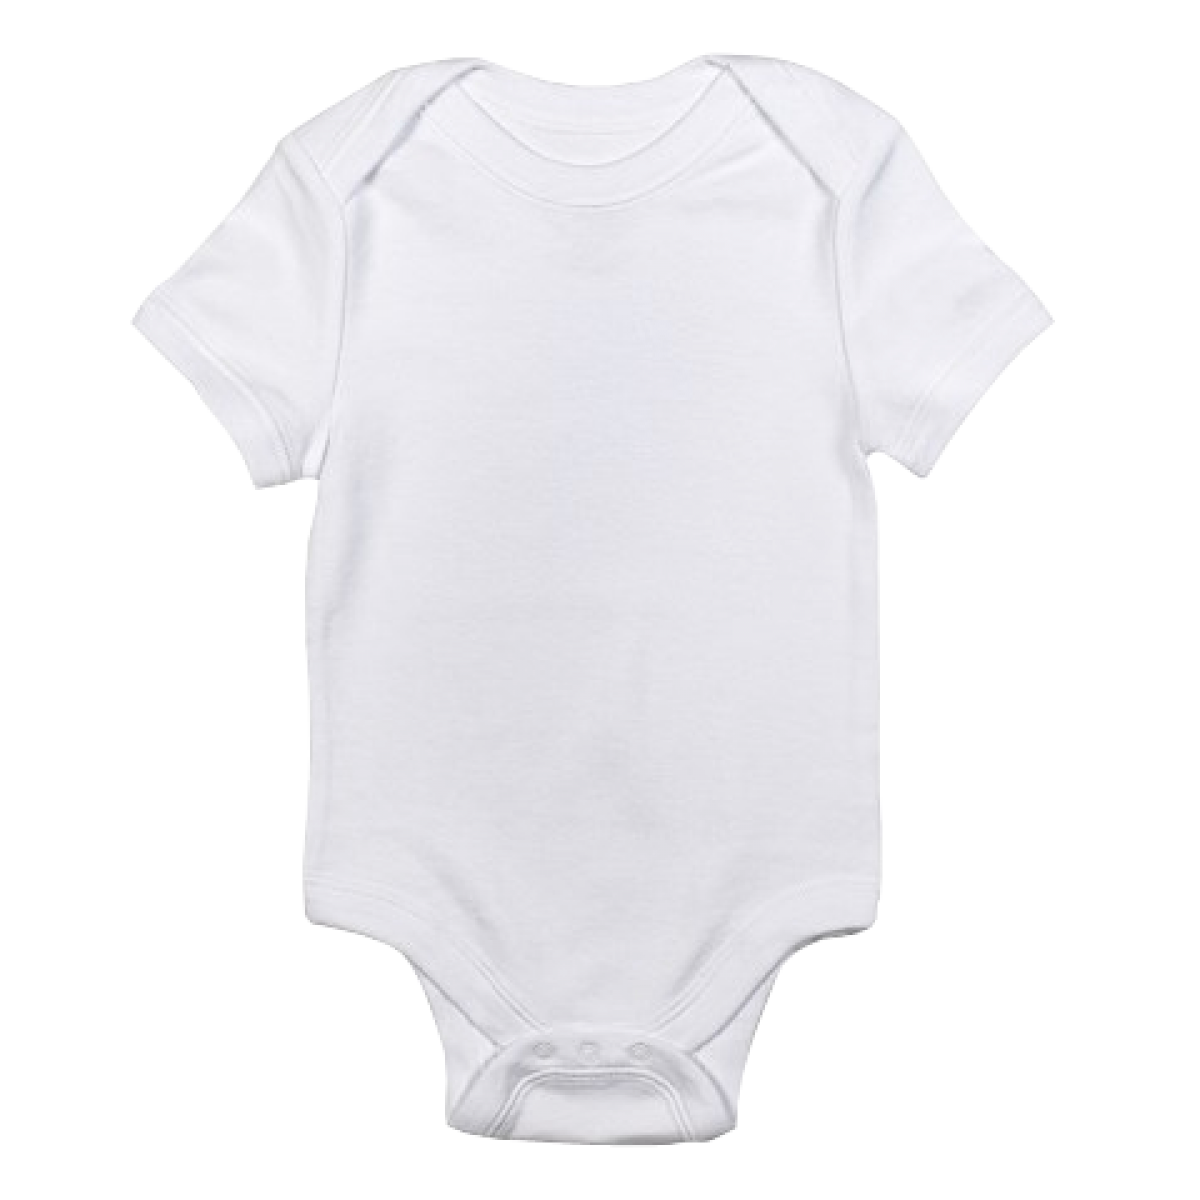 Baby Onesie White Trans   Free Images At Clker Com   Vector Clip Art